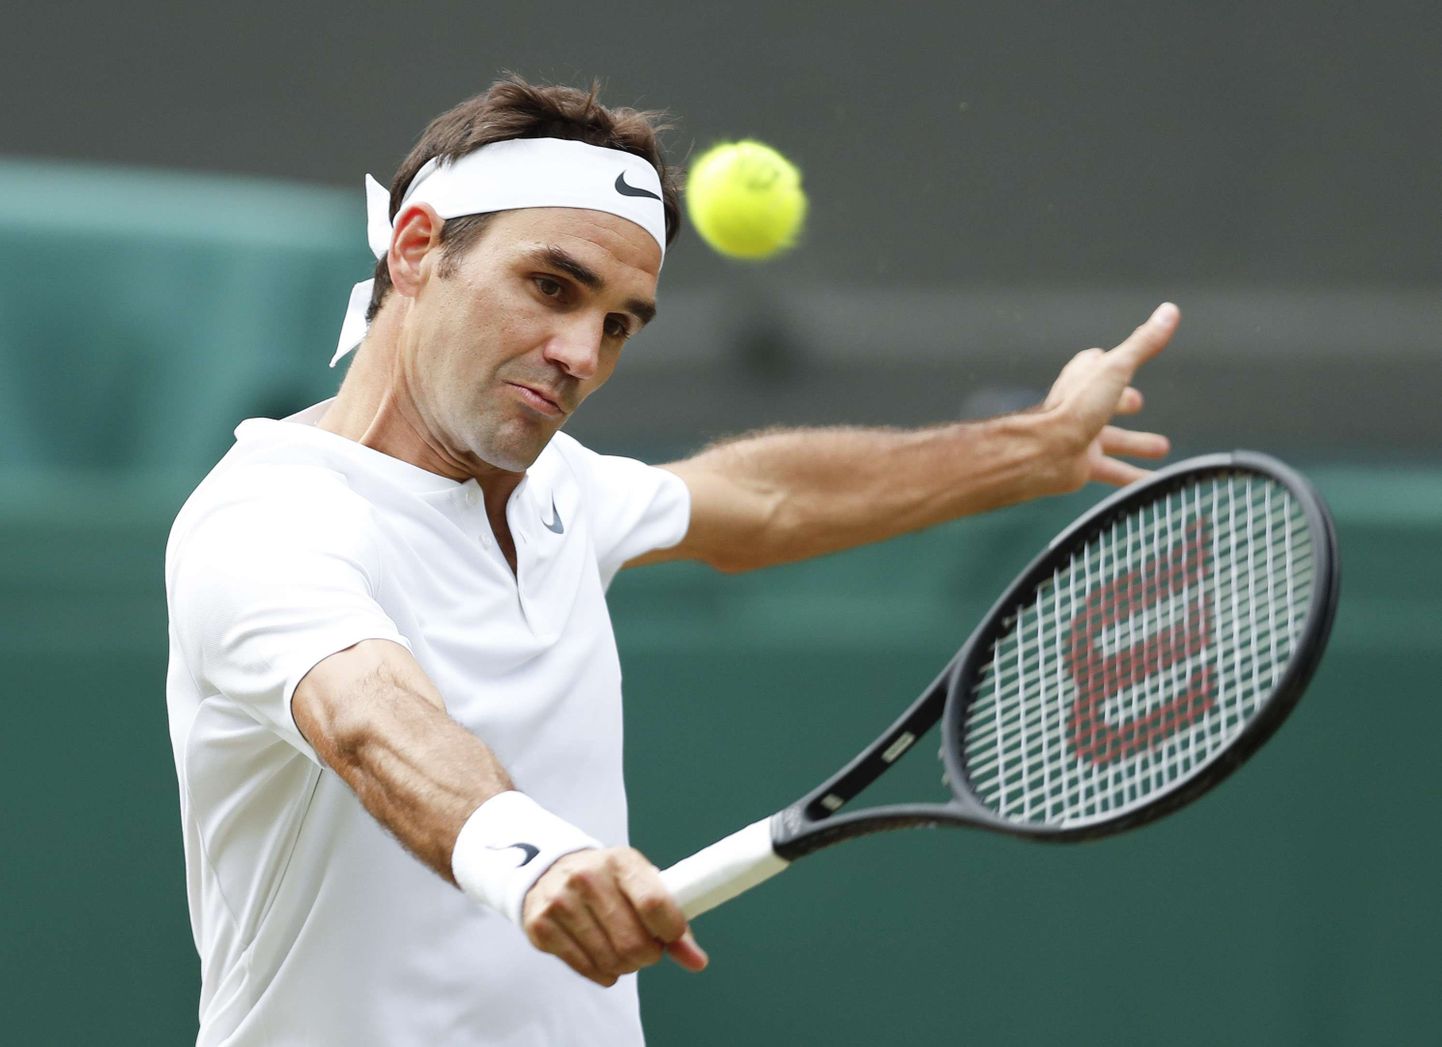 (170713) -- LONDON, July 13, 2017 (Xinhua) -- Roger Federer of Switzerland returns the ball during the men's singles quarterfinal with Milos Raonic of Canada during Day 9 of the Wimbledon Championship 2017 in London, Britain on July 12, 2017. Roger Federer advanced to the semifinal after defeating Milos Raonic with 3-0. (Xinhua/Han Yan)(wll) //CHINENOUVELLE_XxjpbeE000417_20170713_TPPFN0A001/Credit:Han Yan/SIPA/1707131015